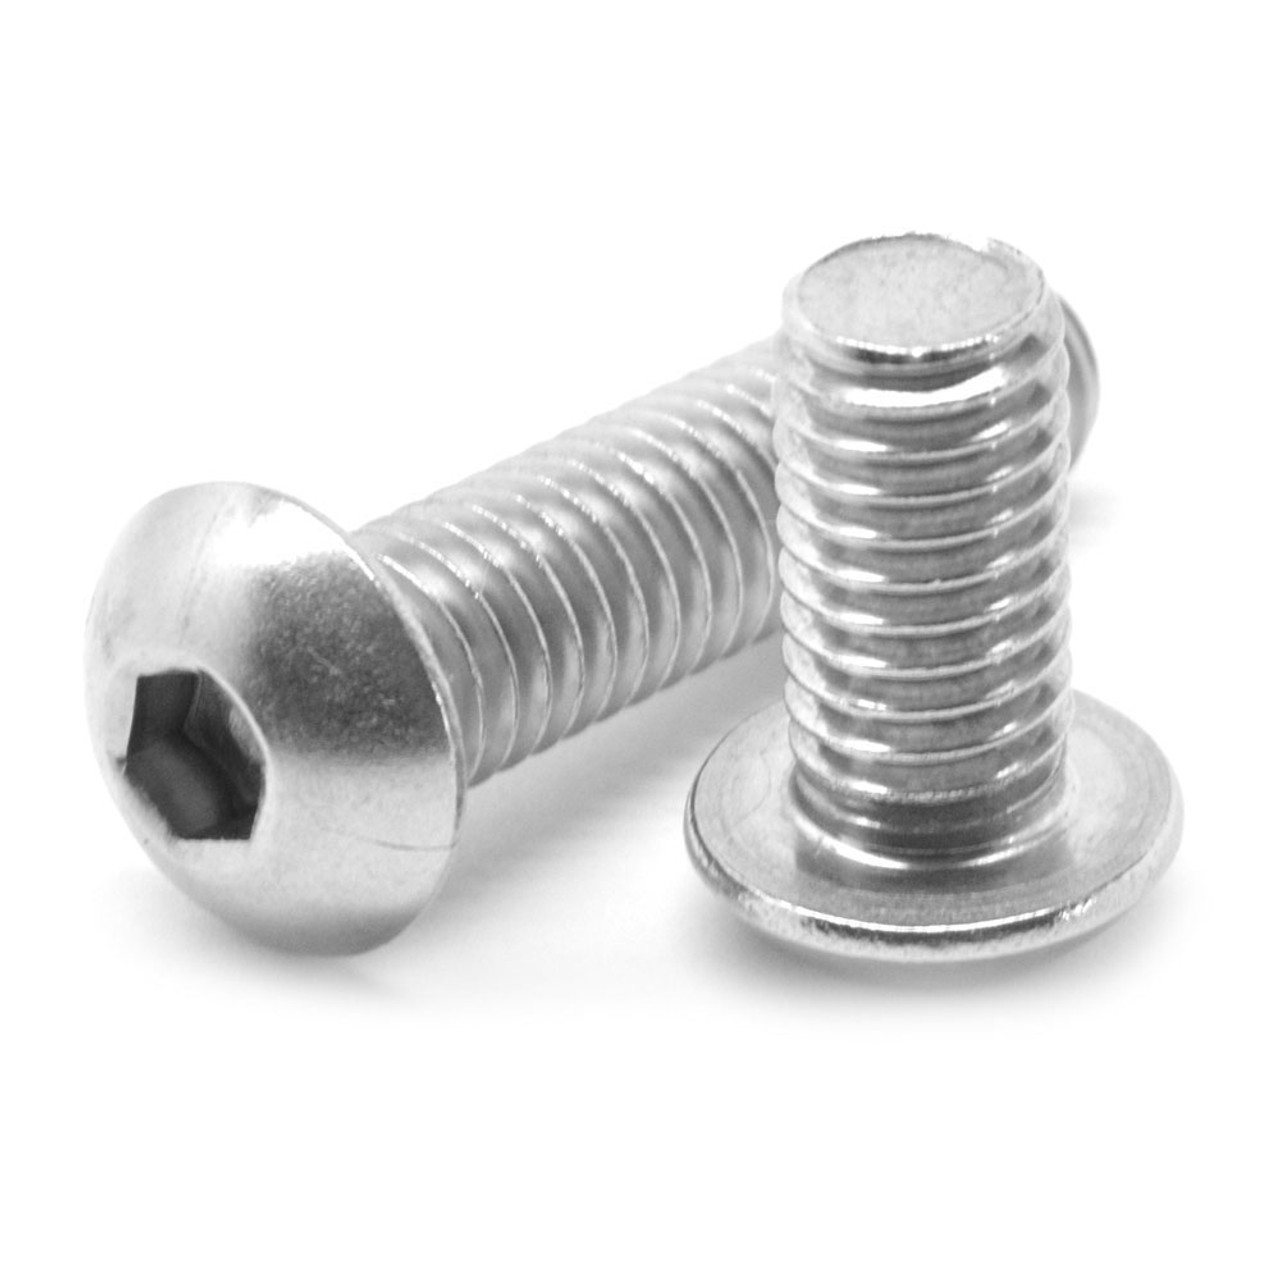 M3 x 0.50 x 35 MM (FT) Coarse Thread ISO 7380 Socket Button Head Cap Screw Stainless Steel 18-8